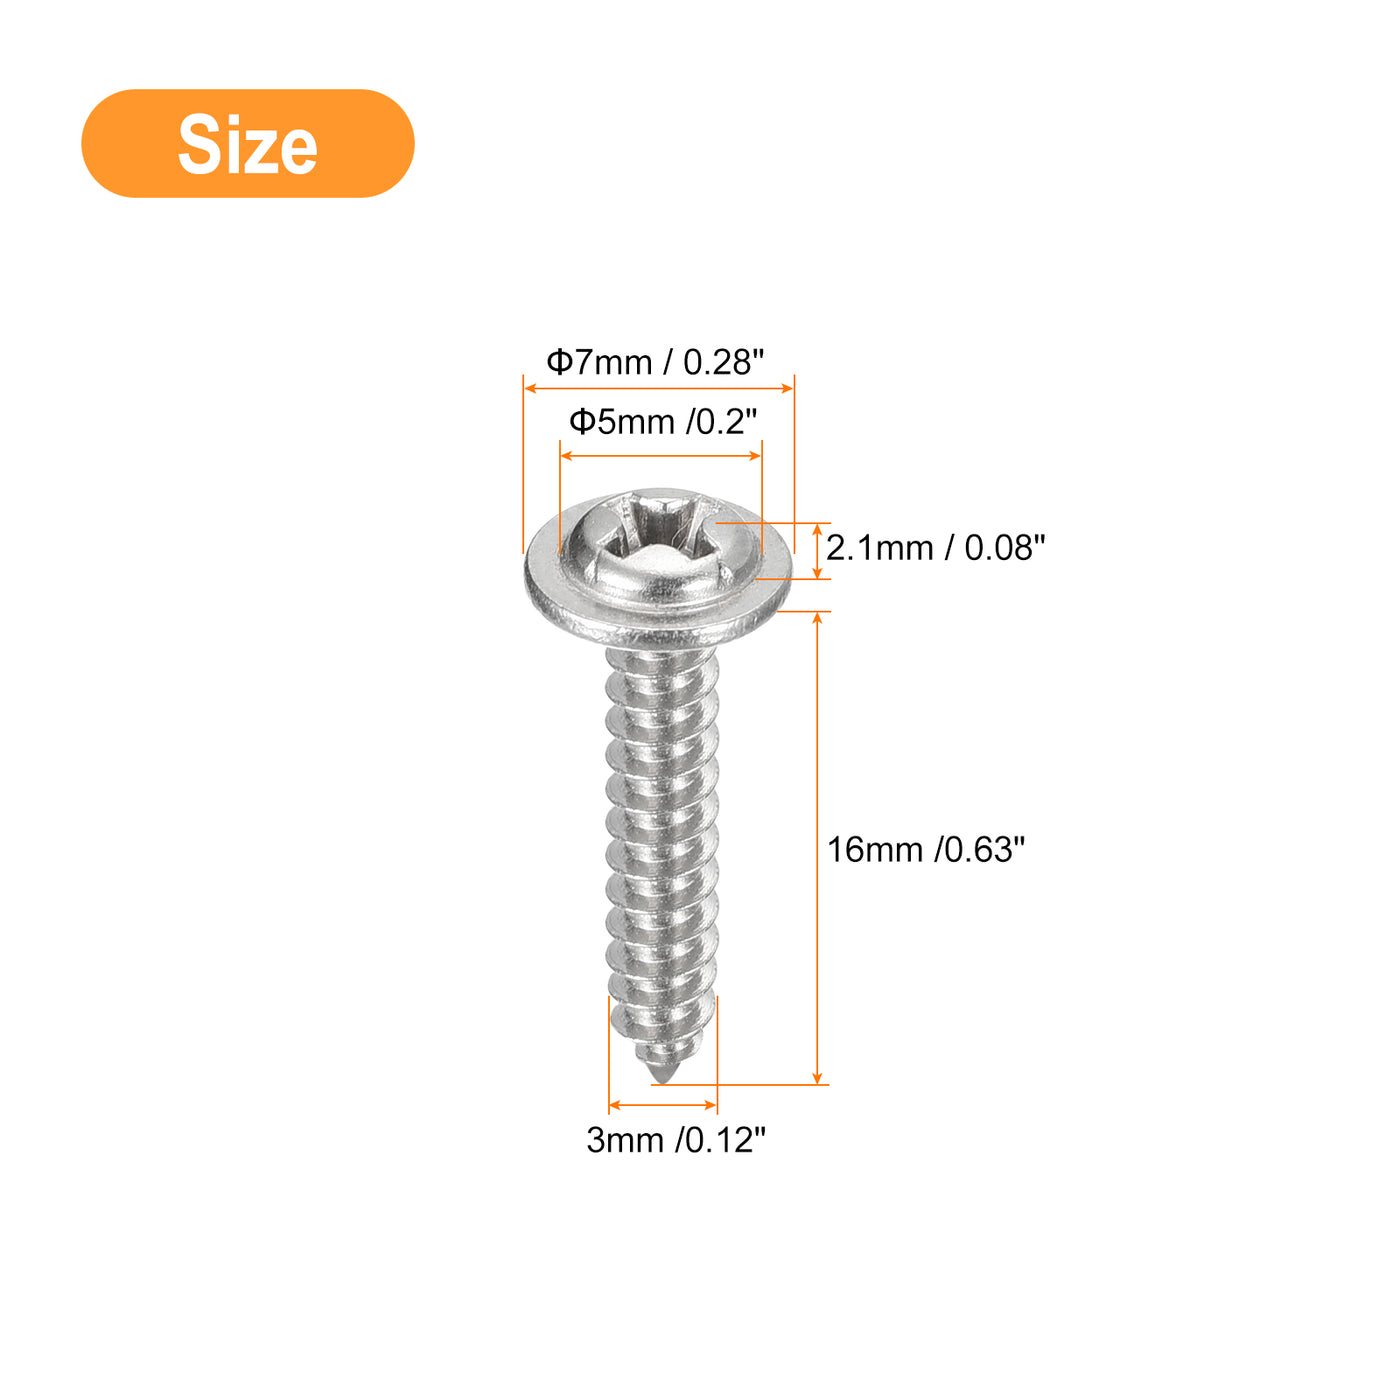 uxcell Uxcell ST3x16mm Phillips Pan Head Self-tapping Screw with Washer, 100pcs - 304 Stainless Steel Wood Screw Full Thread (Silver)